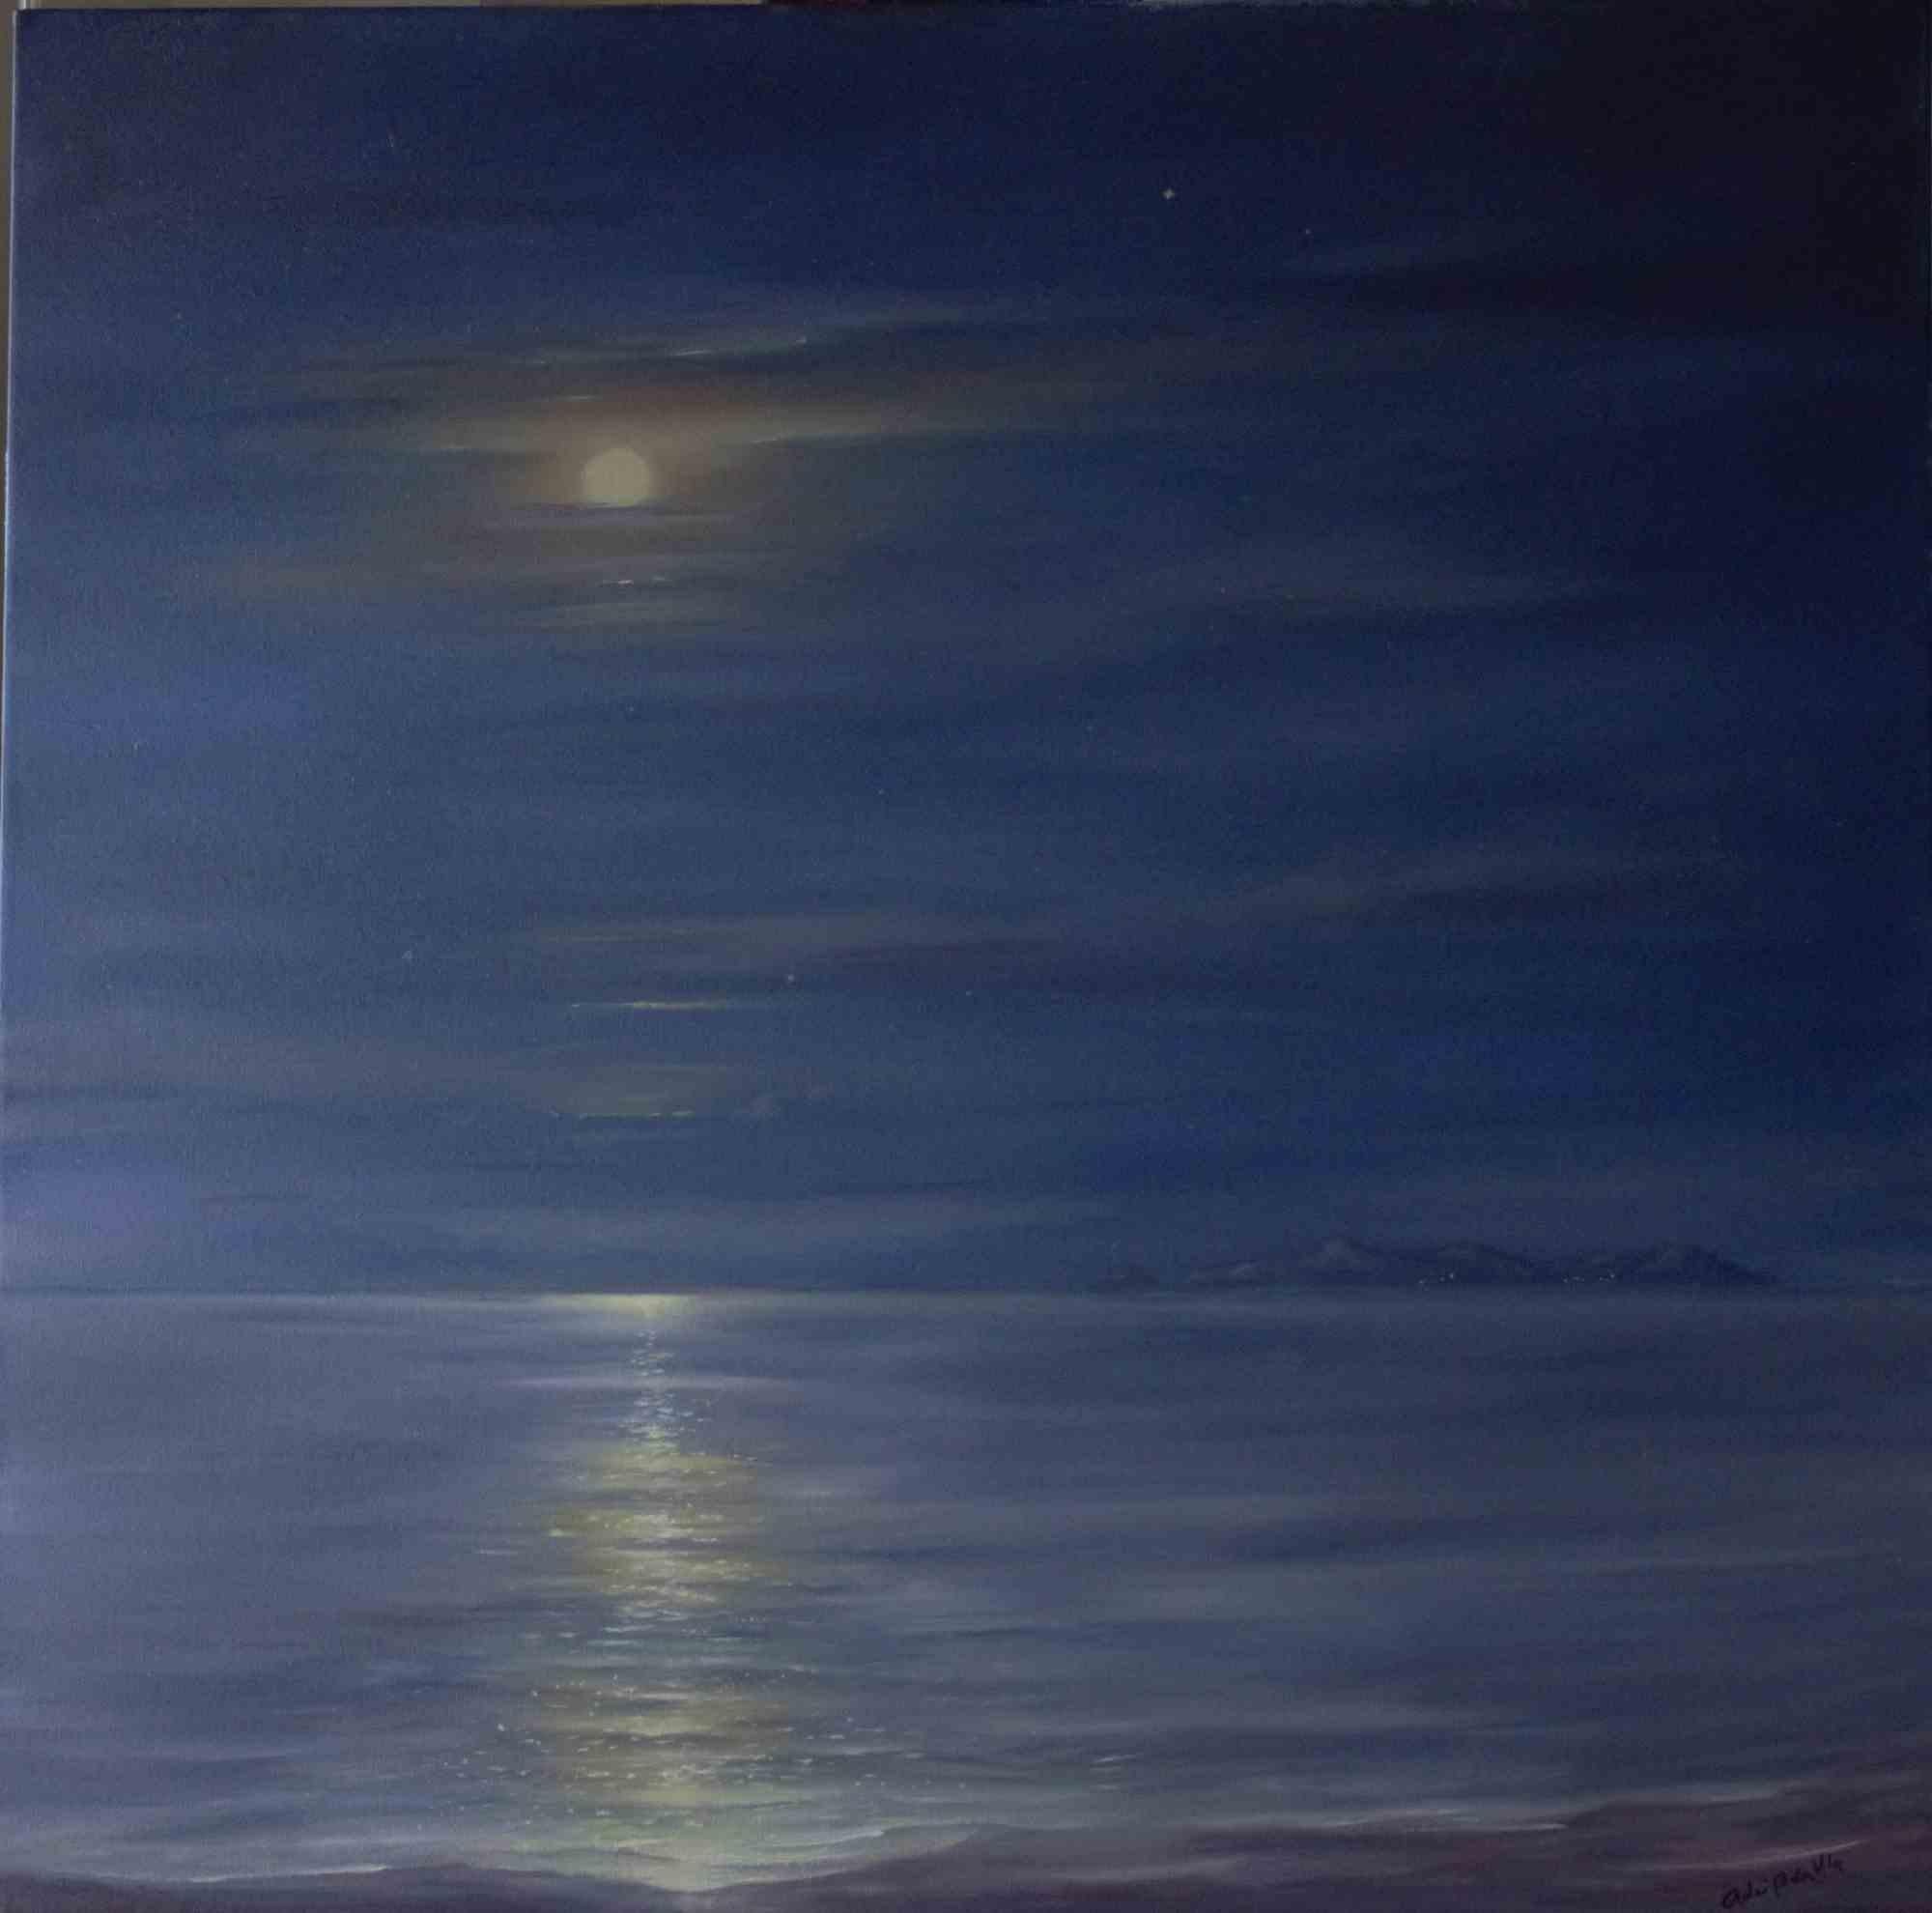 Full Moon Over the Island of Ponza is an original artwork realized by the Italian artist Adriano Bernetti da Vila in 2018.

Hand-signed oil on canvas 80 x 80 cm. The artwork aportrays the magic atmosphere created by the full moon and its reflections